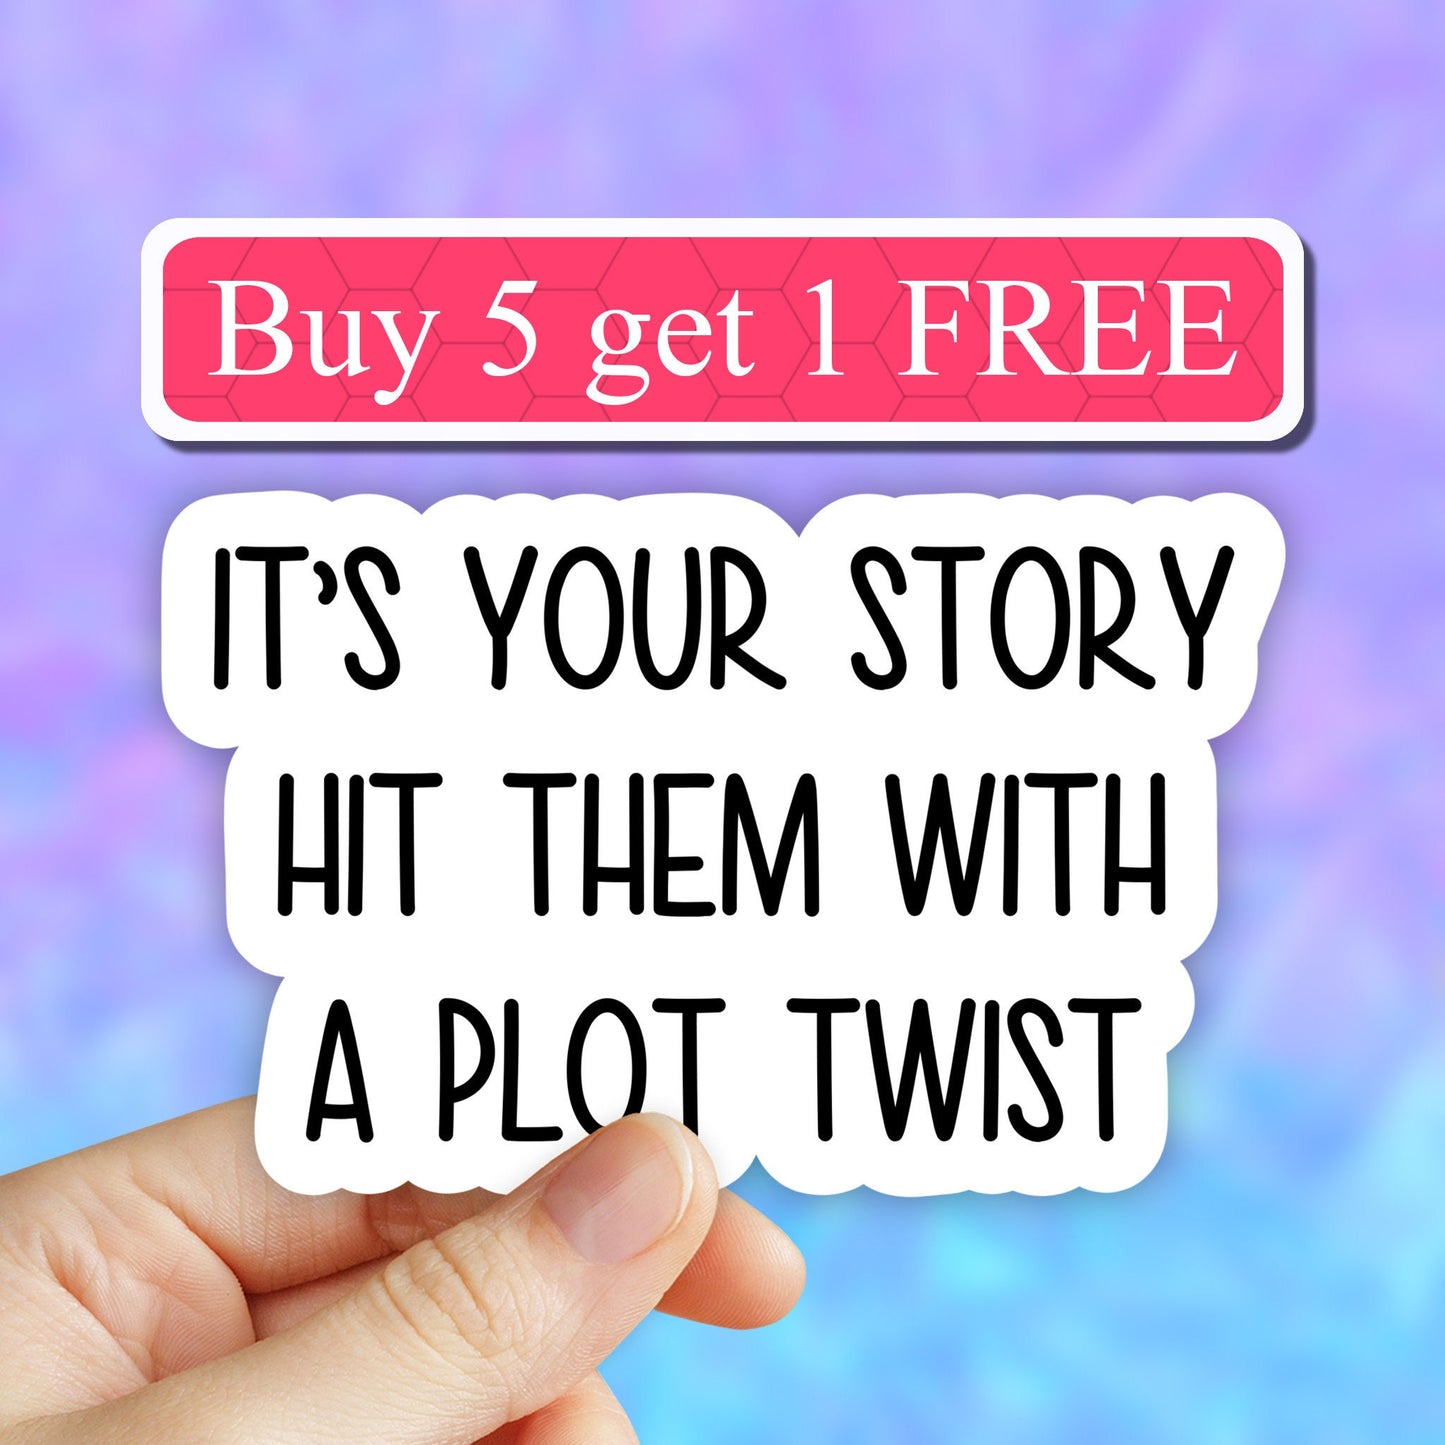 Its your story hit them with a plot twist sticker, motivational Stickers, funny stickers, laptop decals, tumbler stickers, water bottle